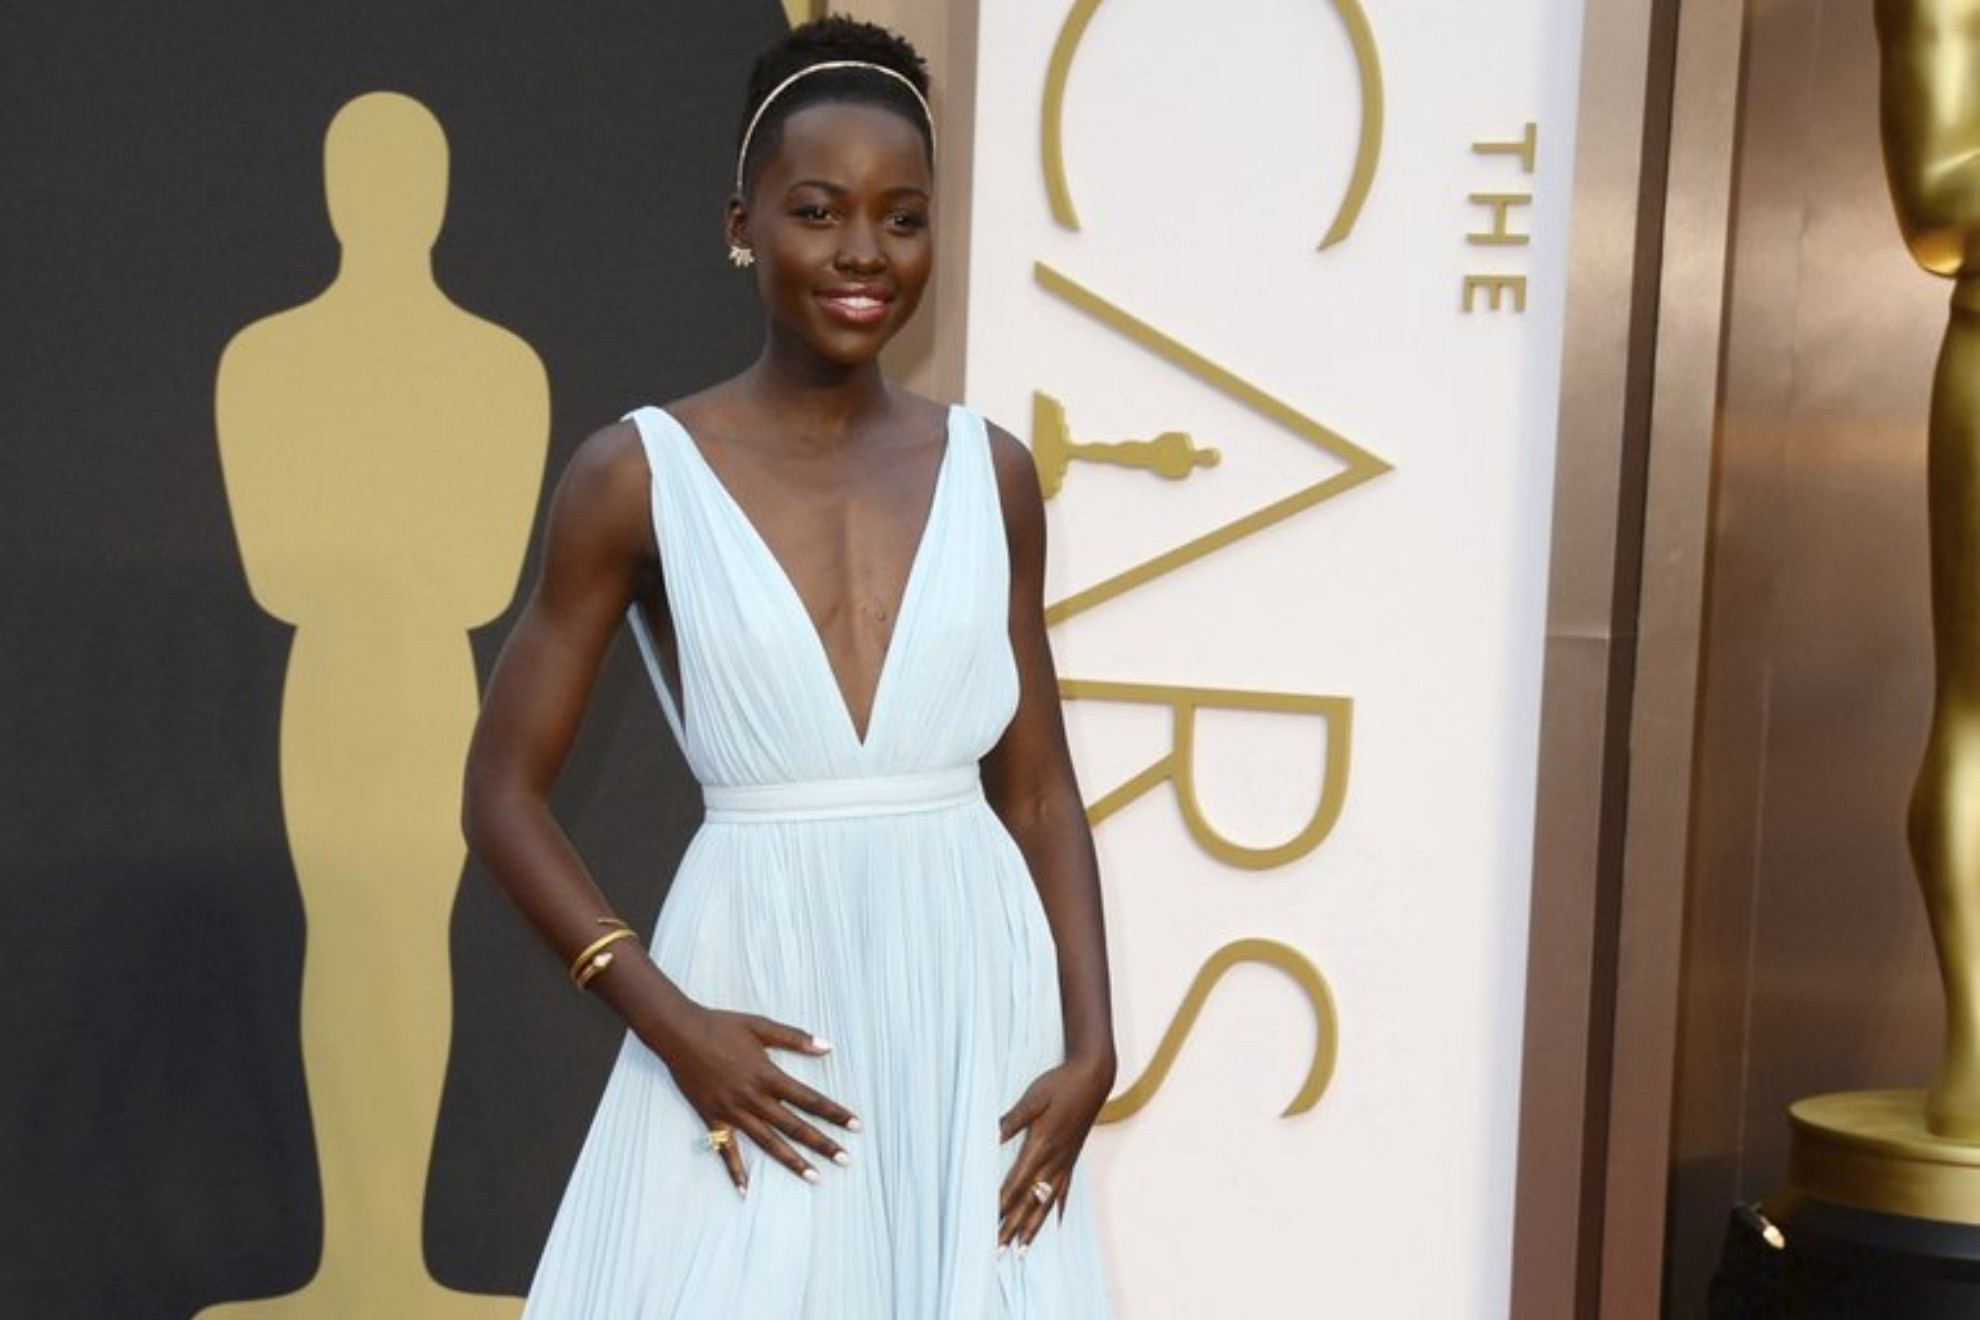 Lupita Nyong'o won the Oscar in 2014 for her role in "12 Years a Slave."